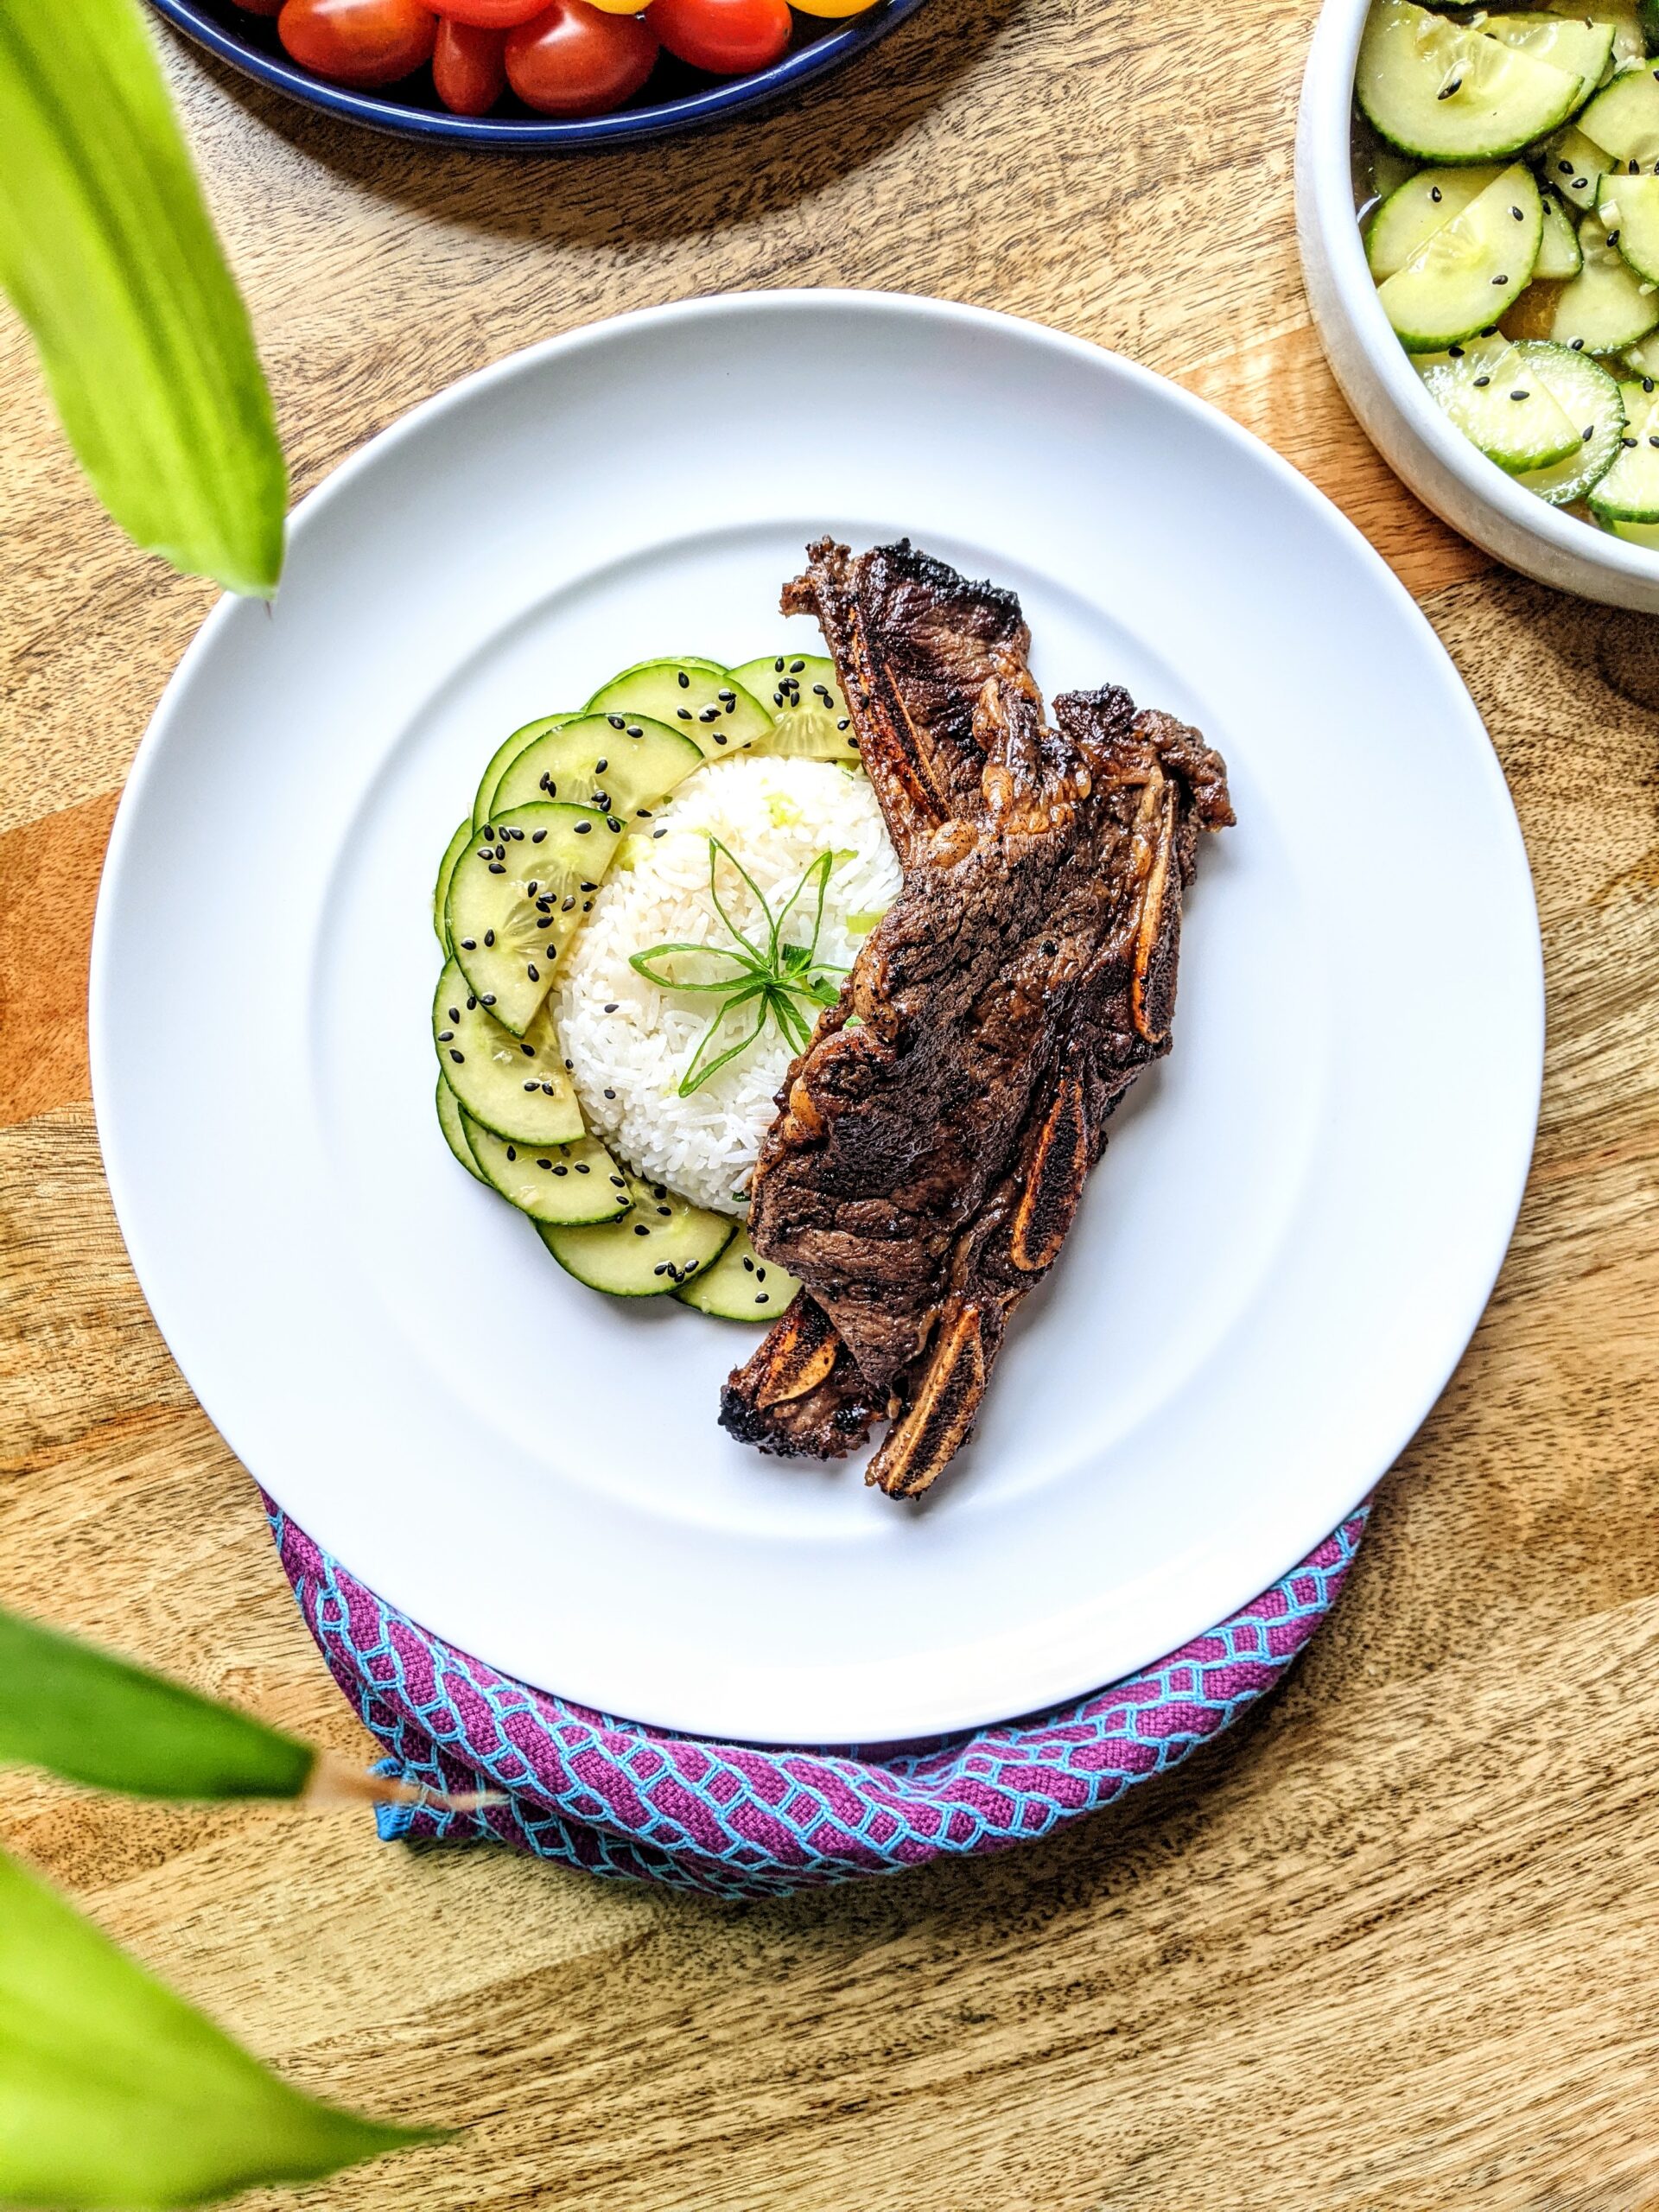 Two grilled Korean BBQ short ribs draped over Jasmine rice and cucumber salad with toasted sesame seeds.